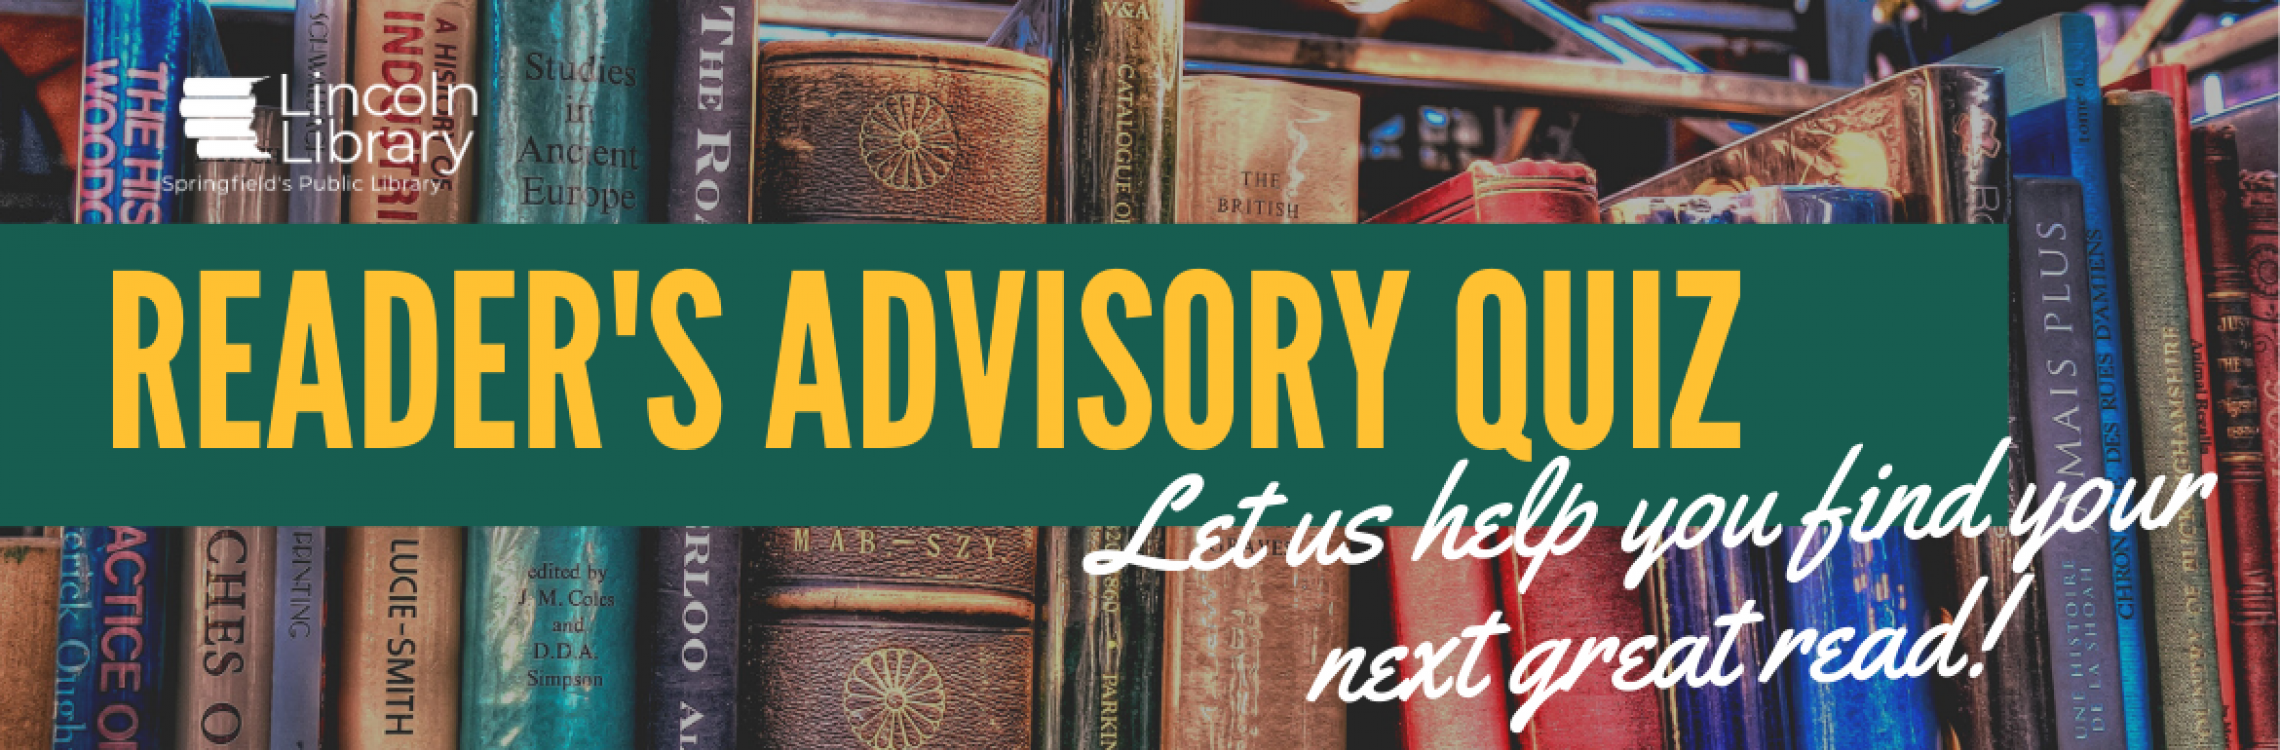 Reader's Advisory Quiz: Let us help you find your next great read